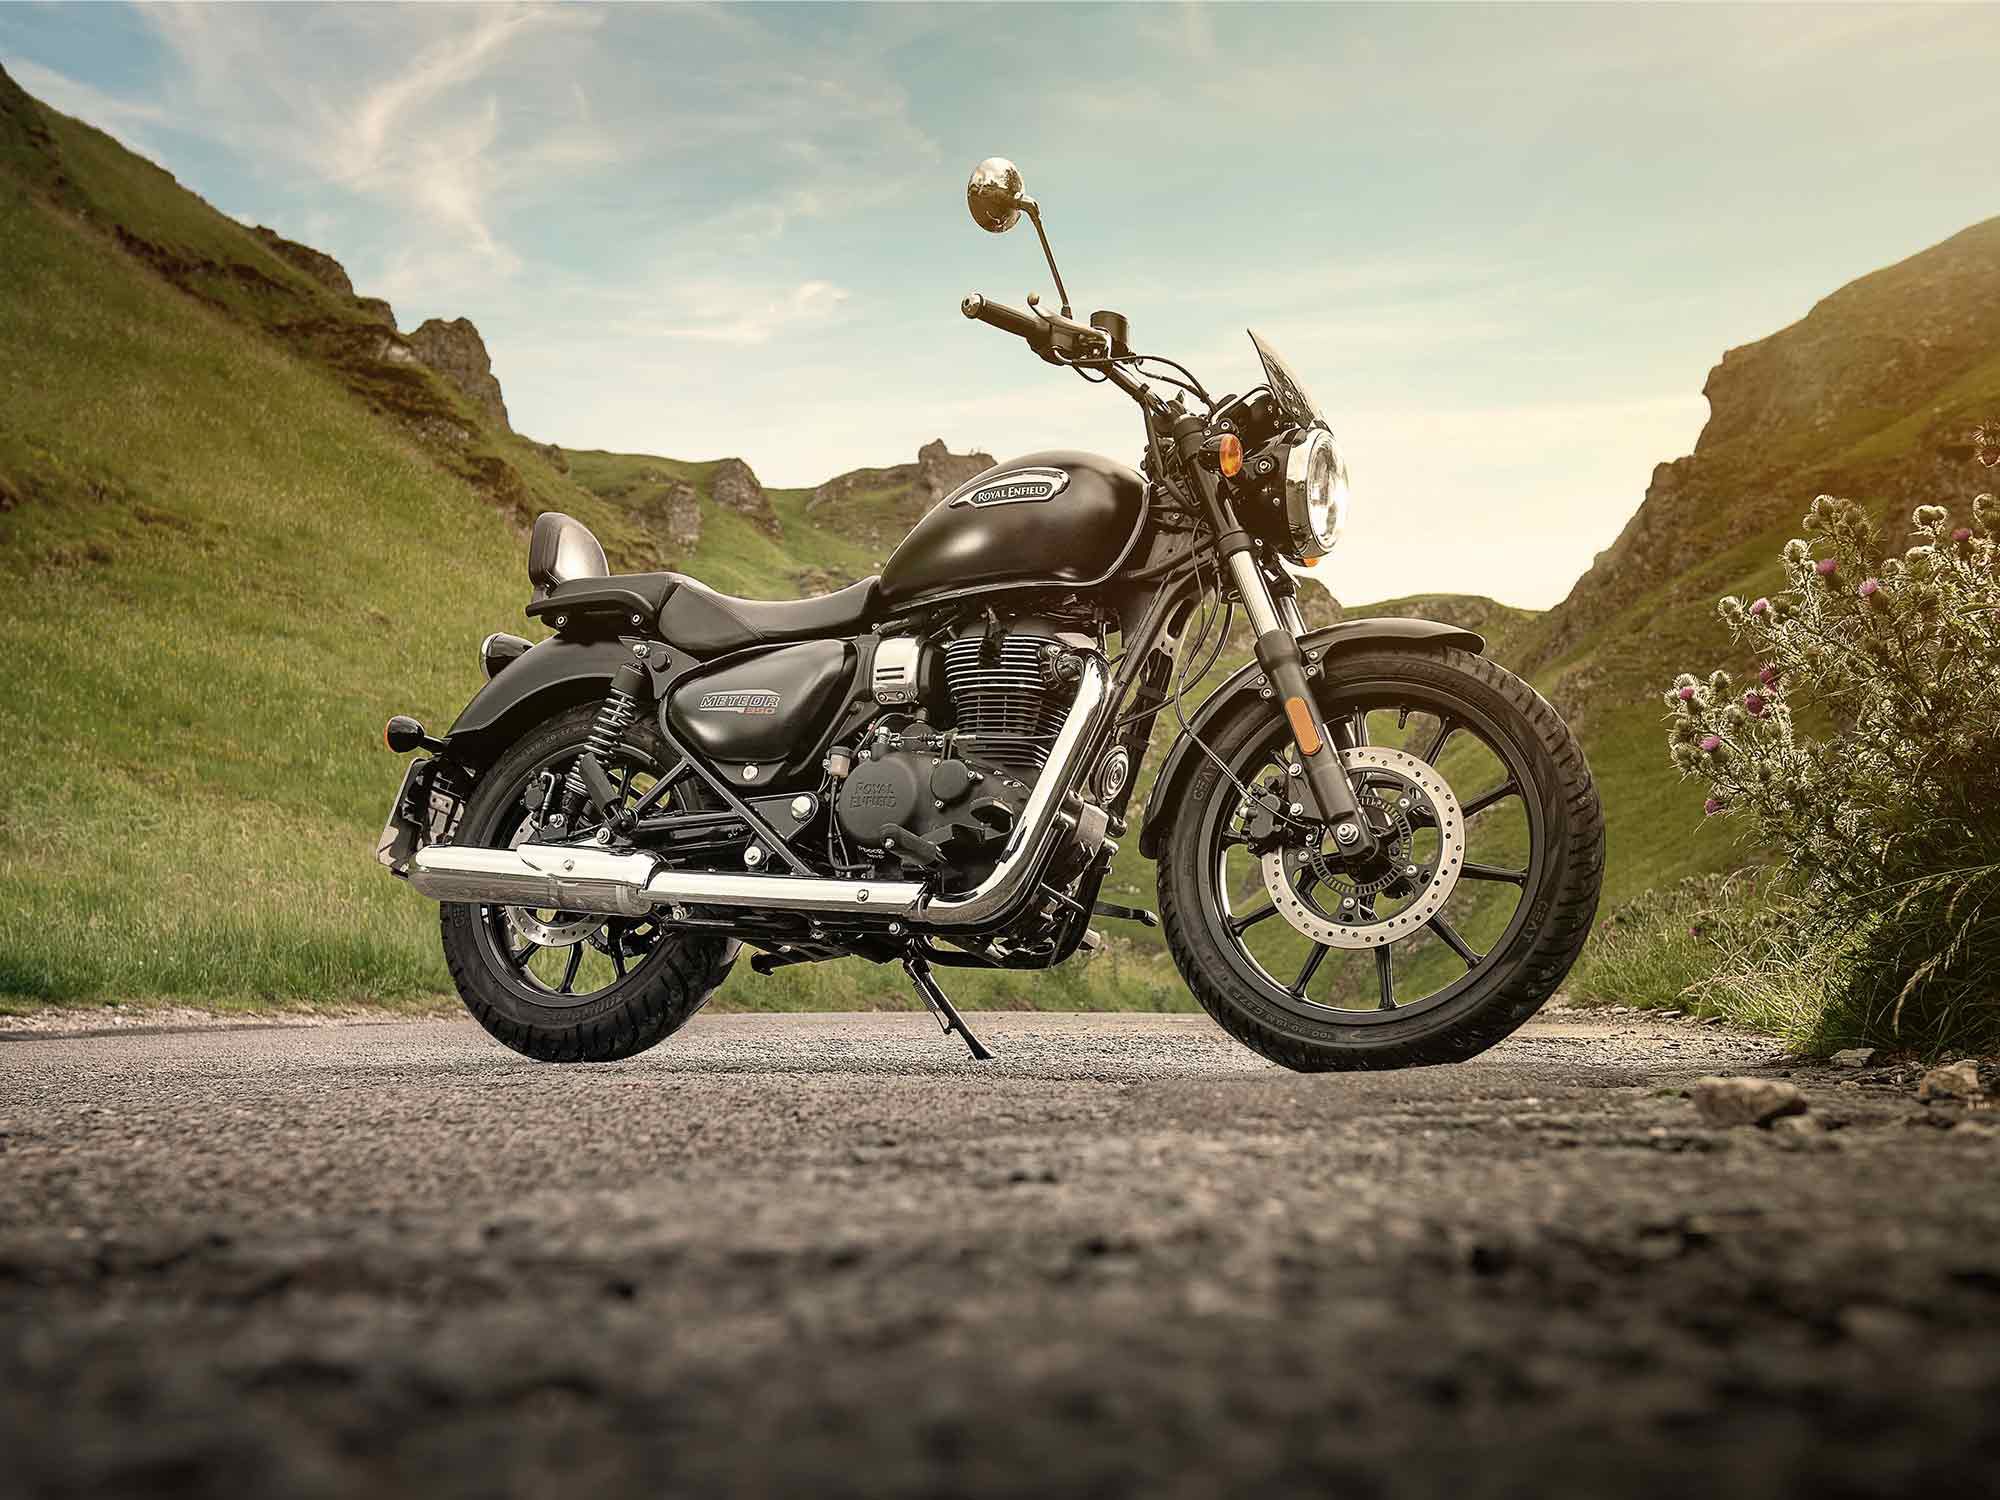 For retro looks, simple mechanics, and a chill ride look no further than the Royal Enfield Meteor.